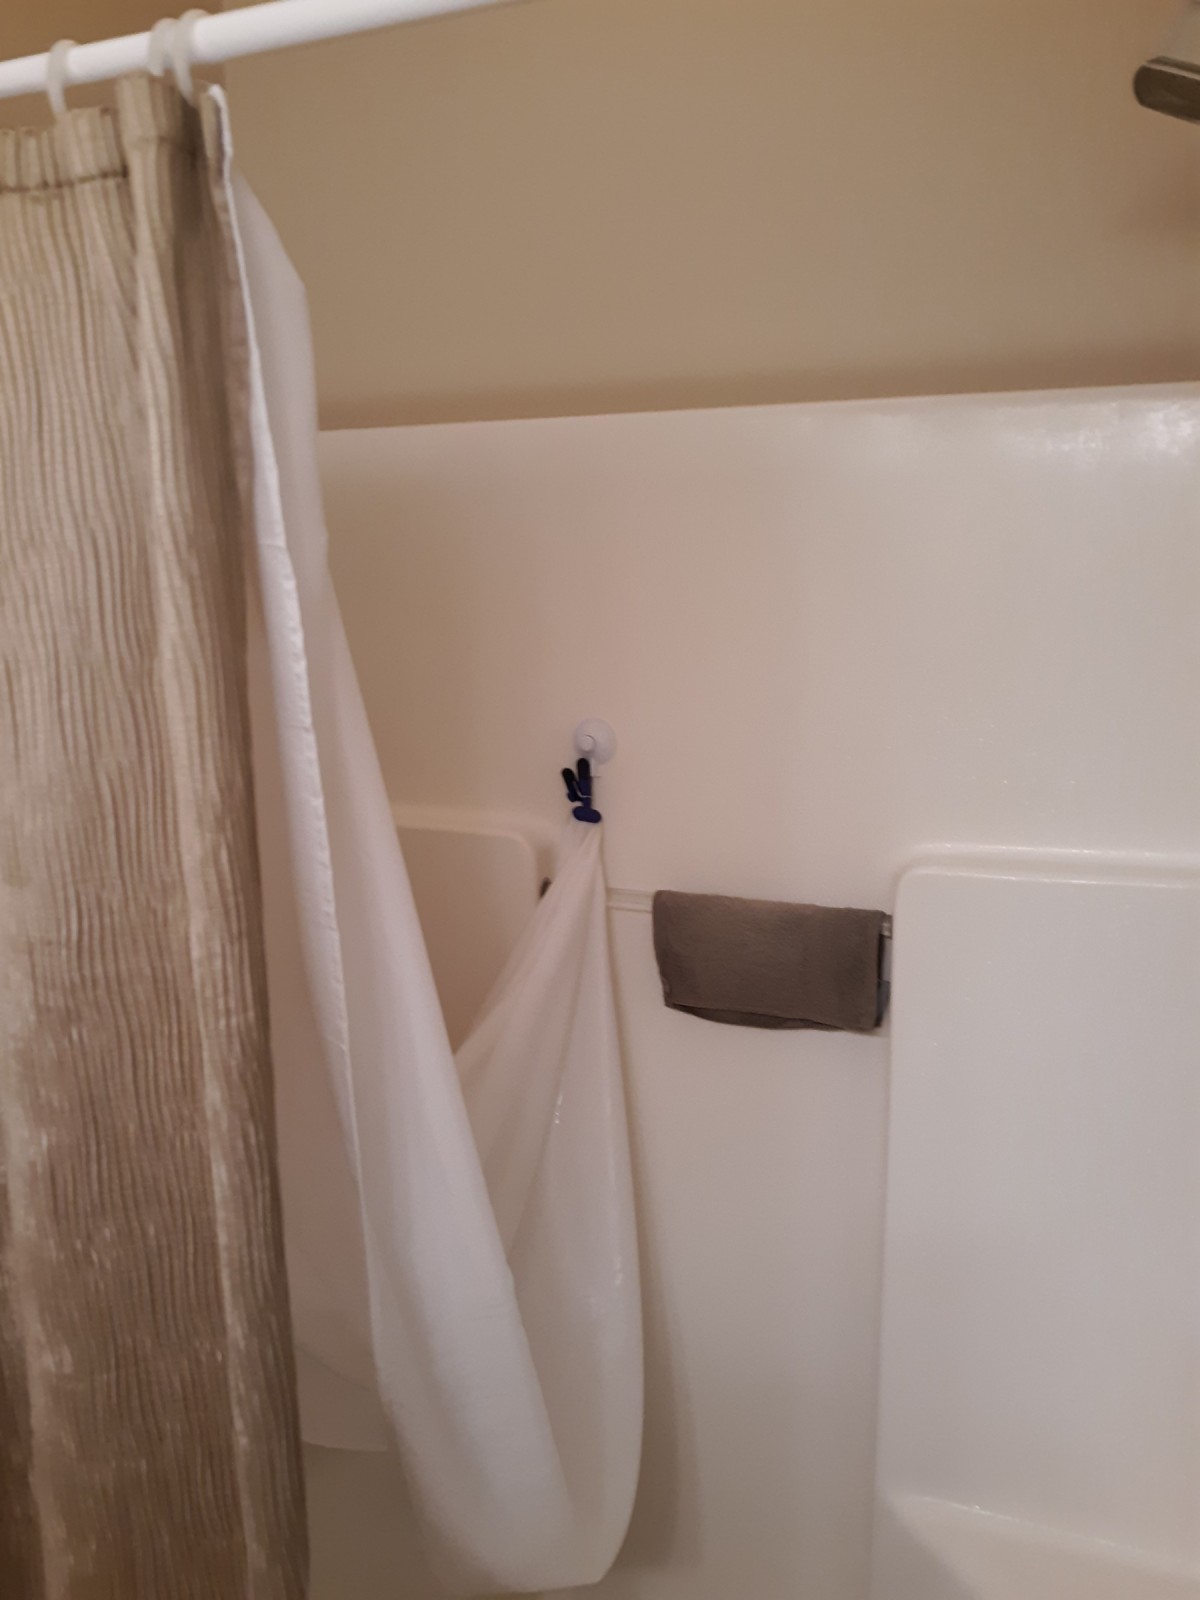 Mildew On Shower Curtain Liners, How To Launder Shower Curtain Liner